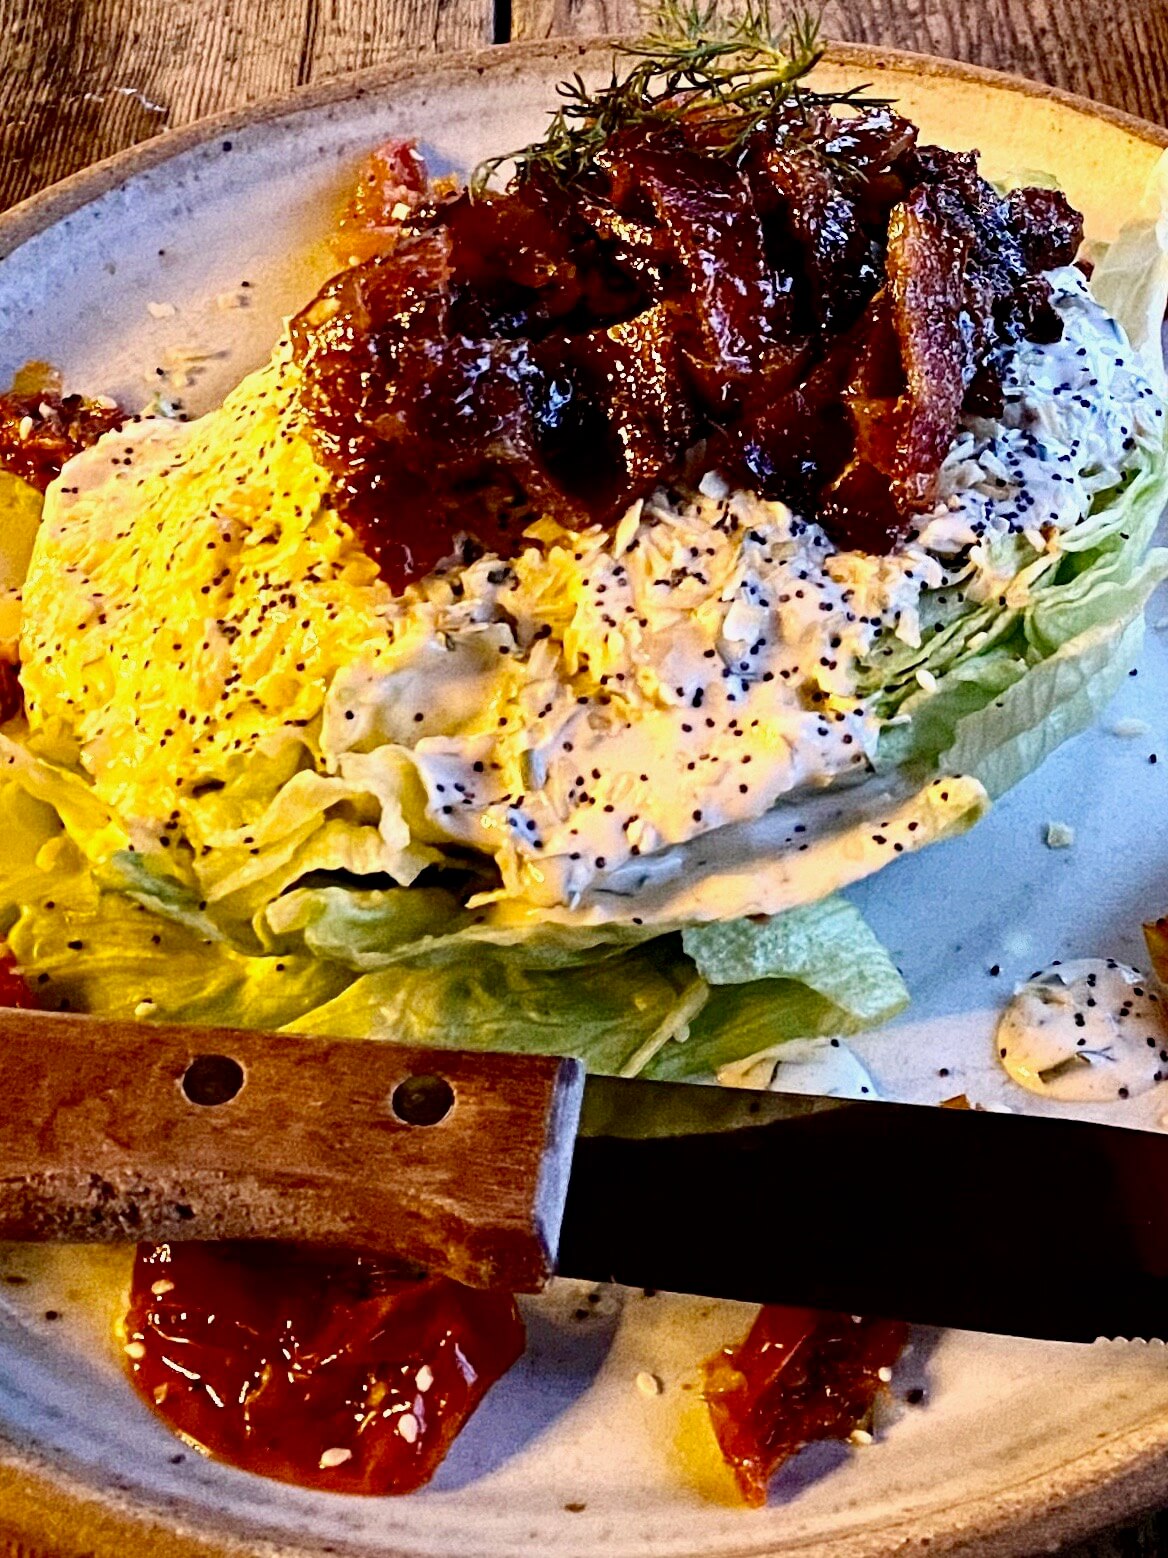 A close up of chop salad of iceberg lettuce with marinated bacon on top and a knife crosses the pottery plate covered some peeled dates.